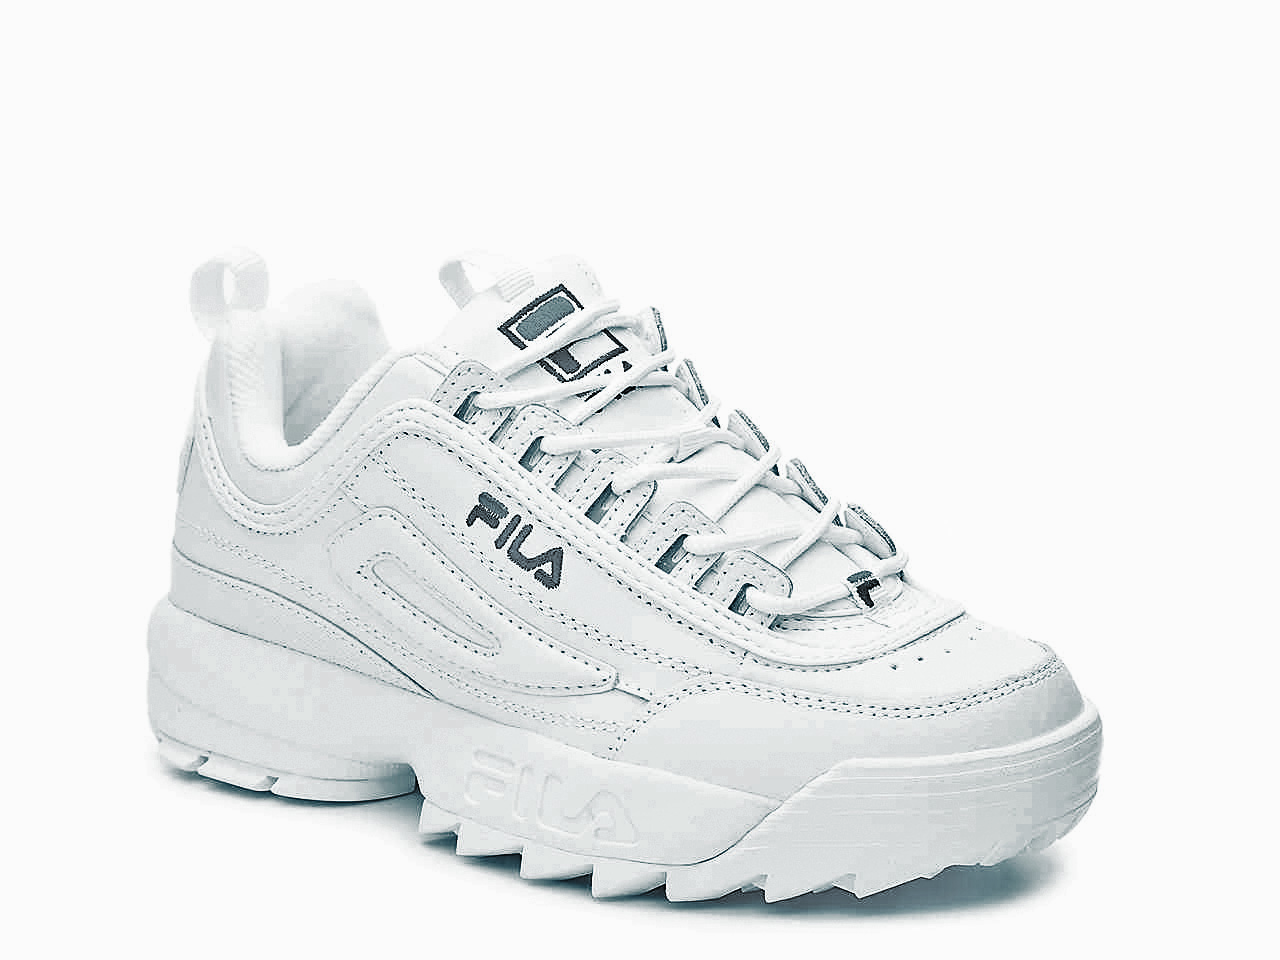 Why Are Fila Shoes Clunk?